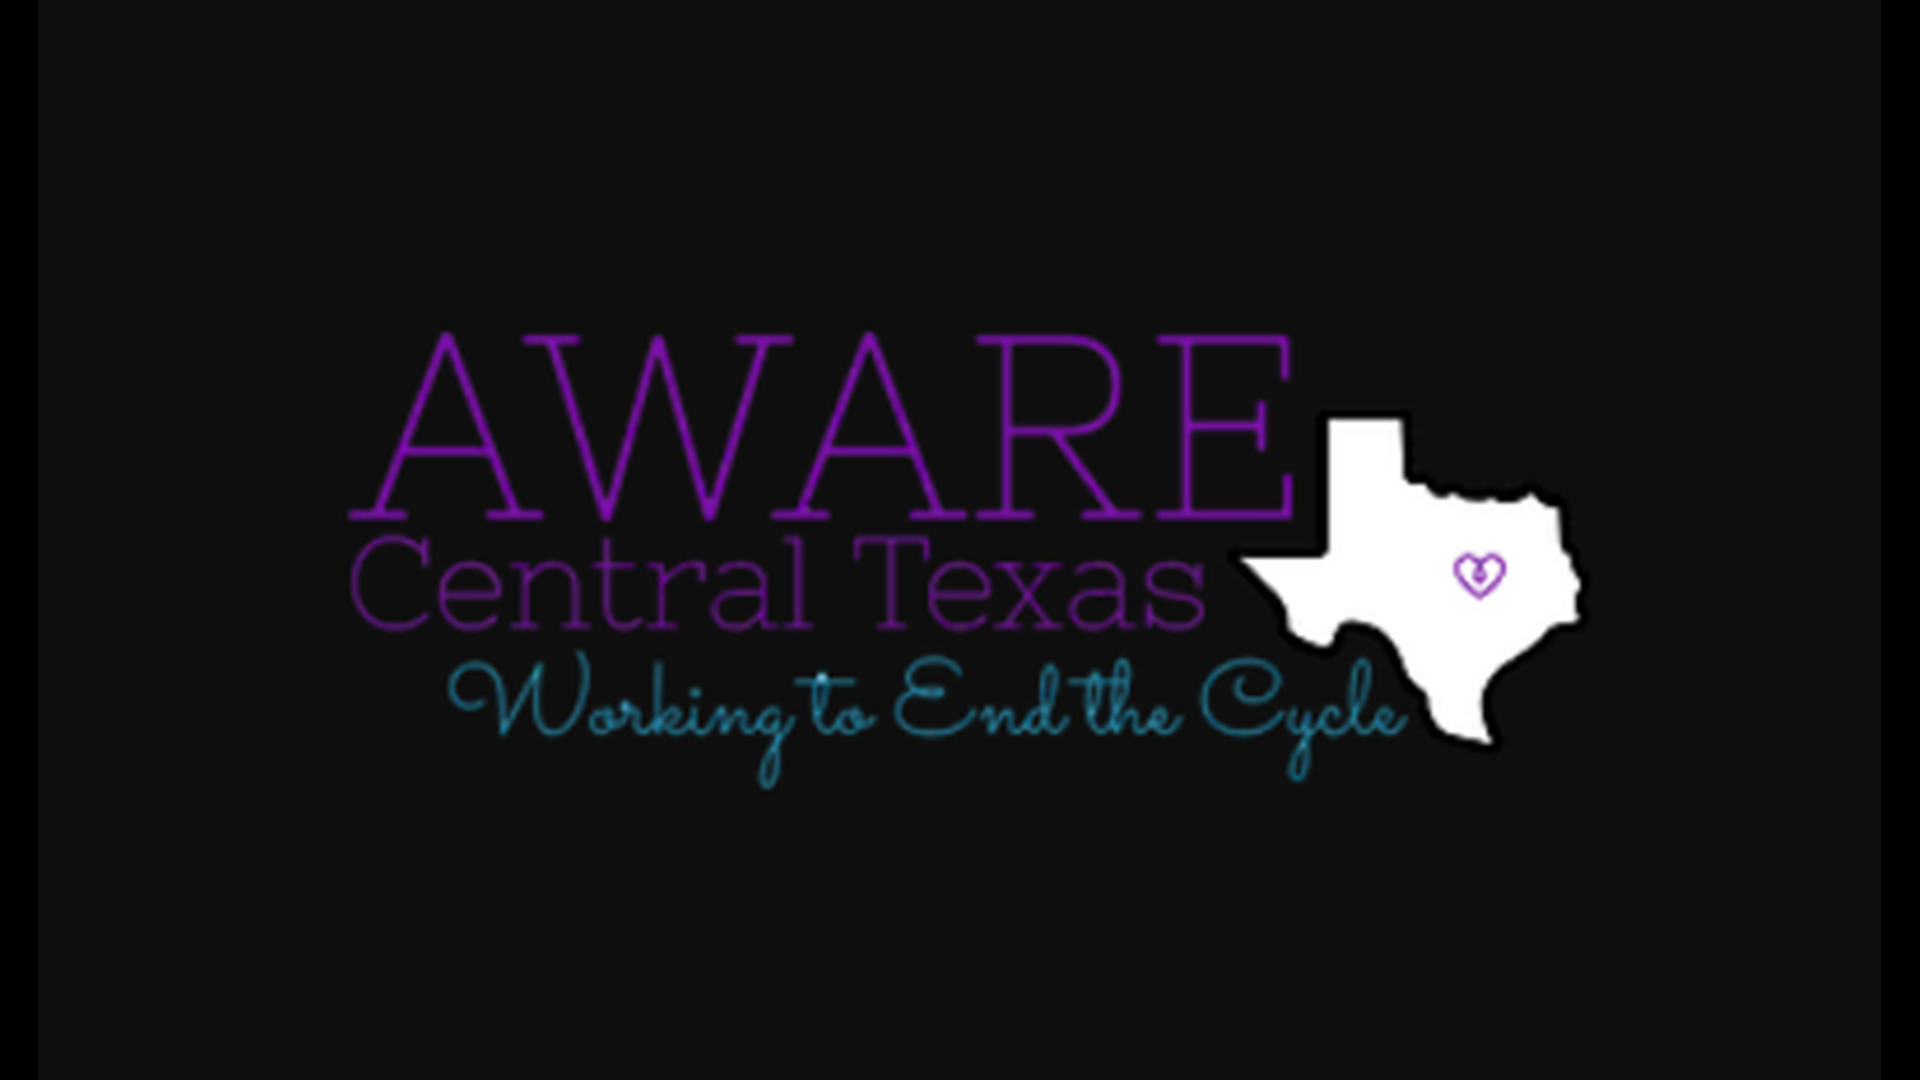 A local support organization AWARE Central Texas says they've seen more people asking for help in the last few weeks.